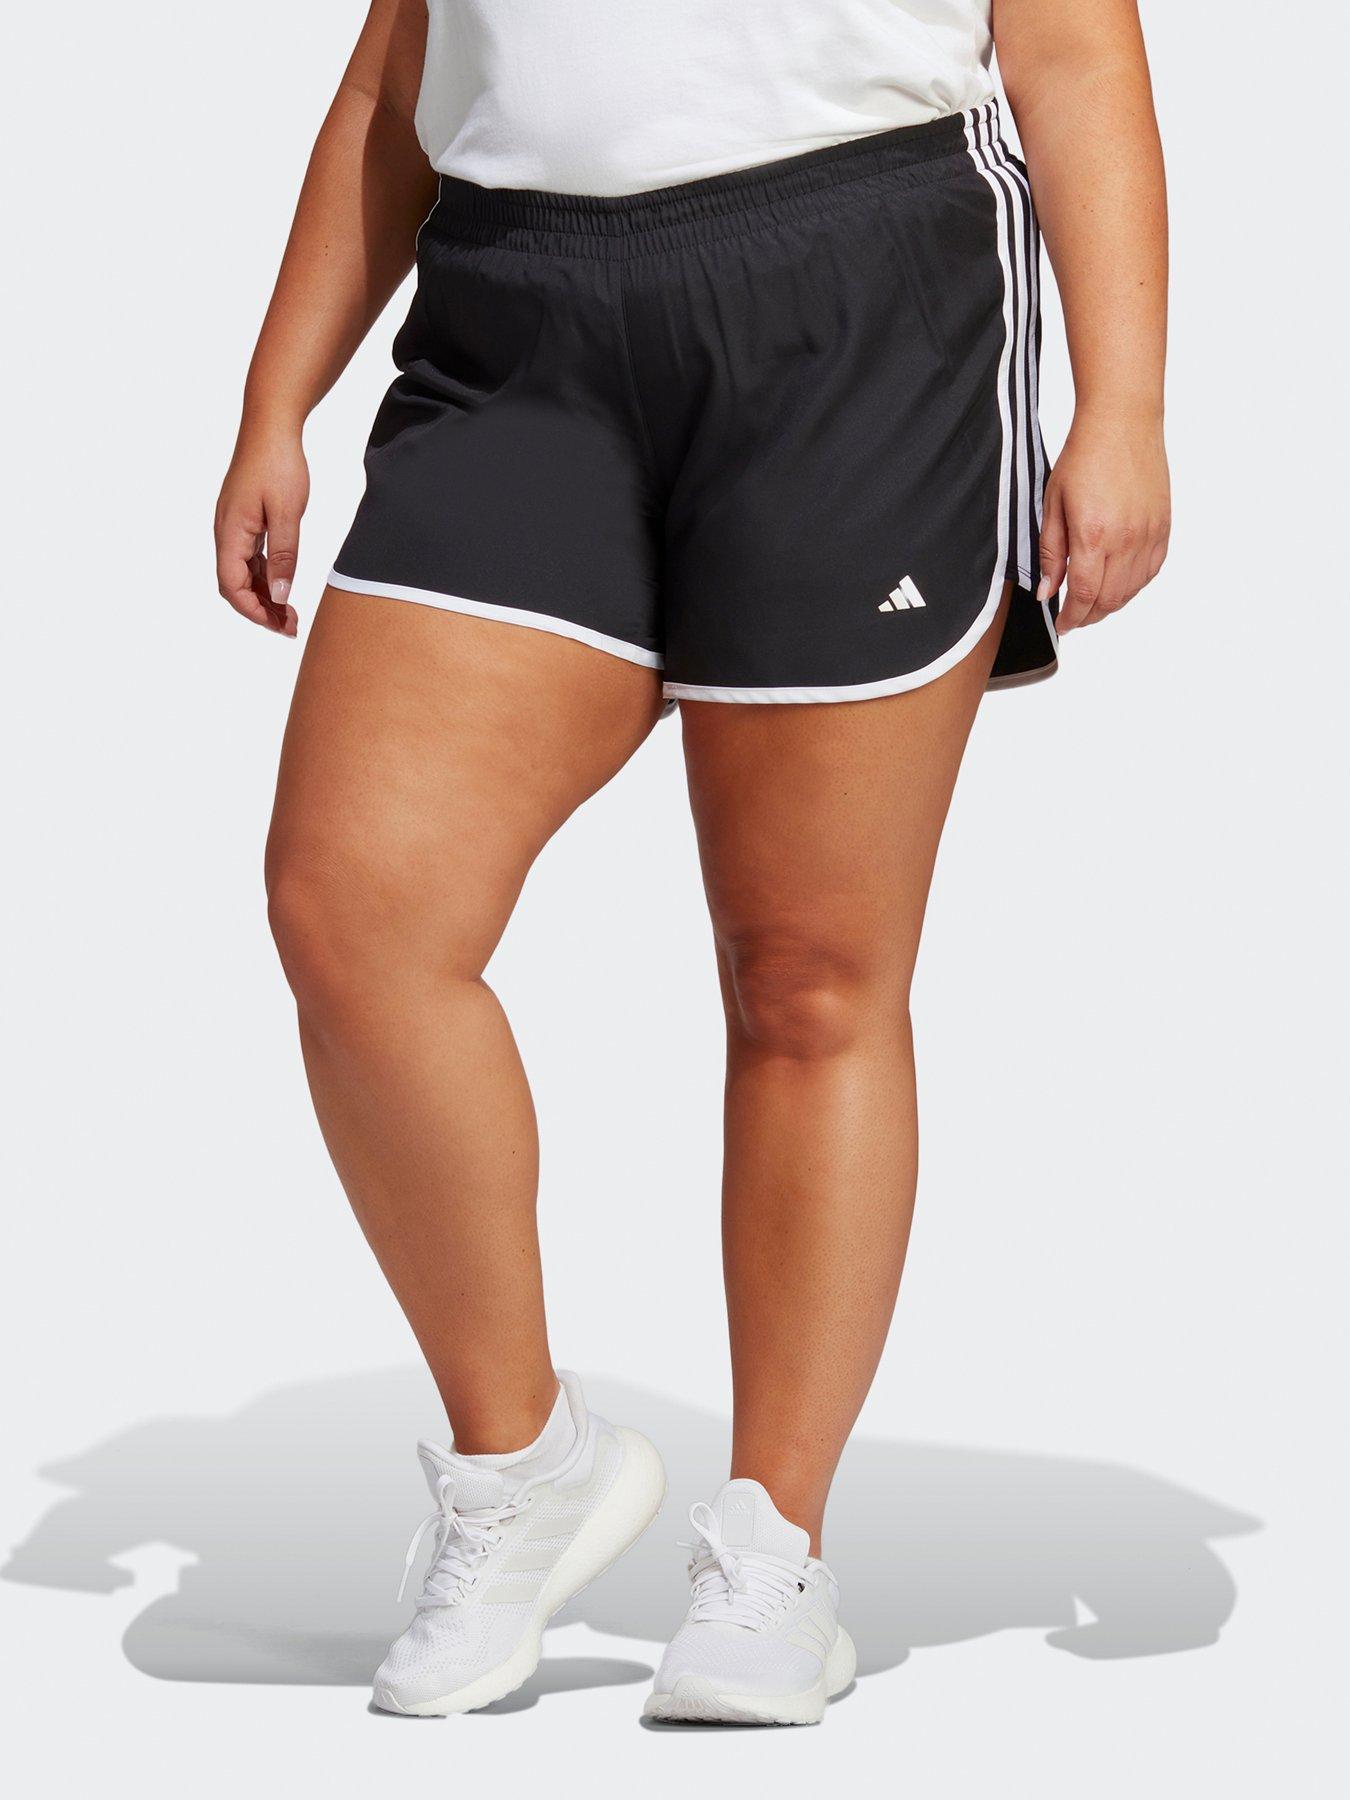 UNDER ARMOUR Women's Training Play Up 5 Inch Shorts - Black/White